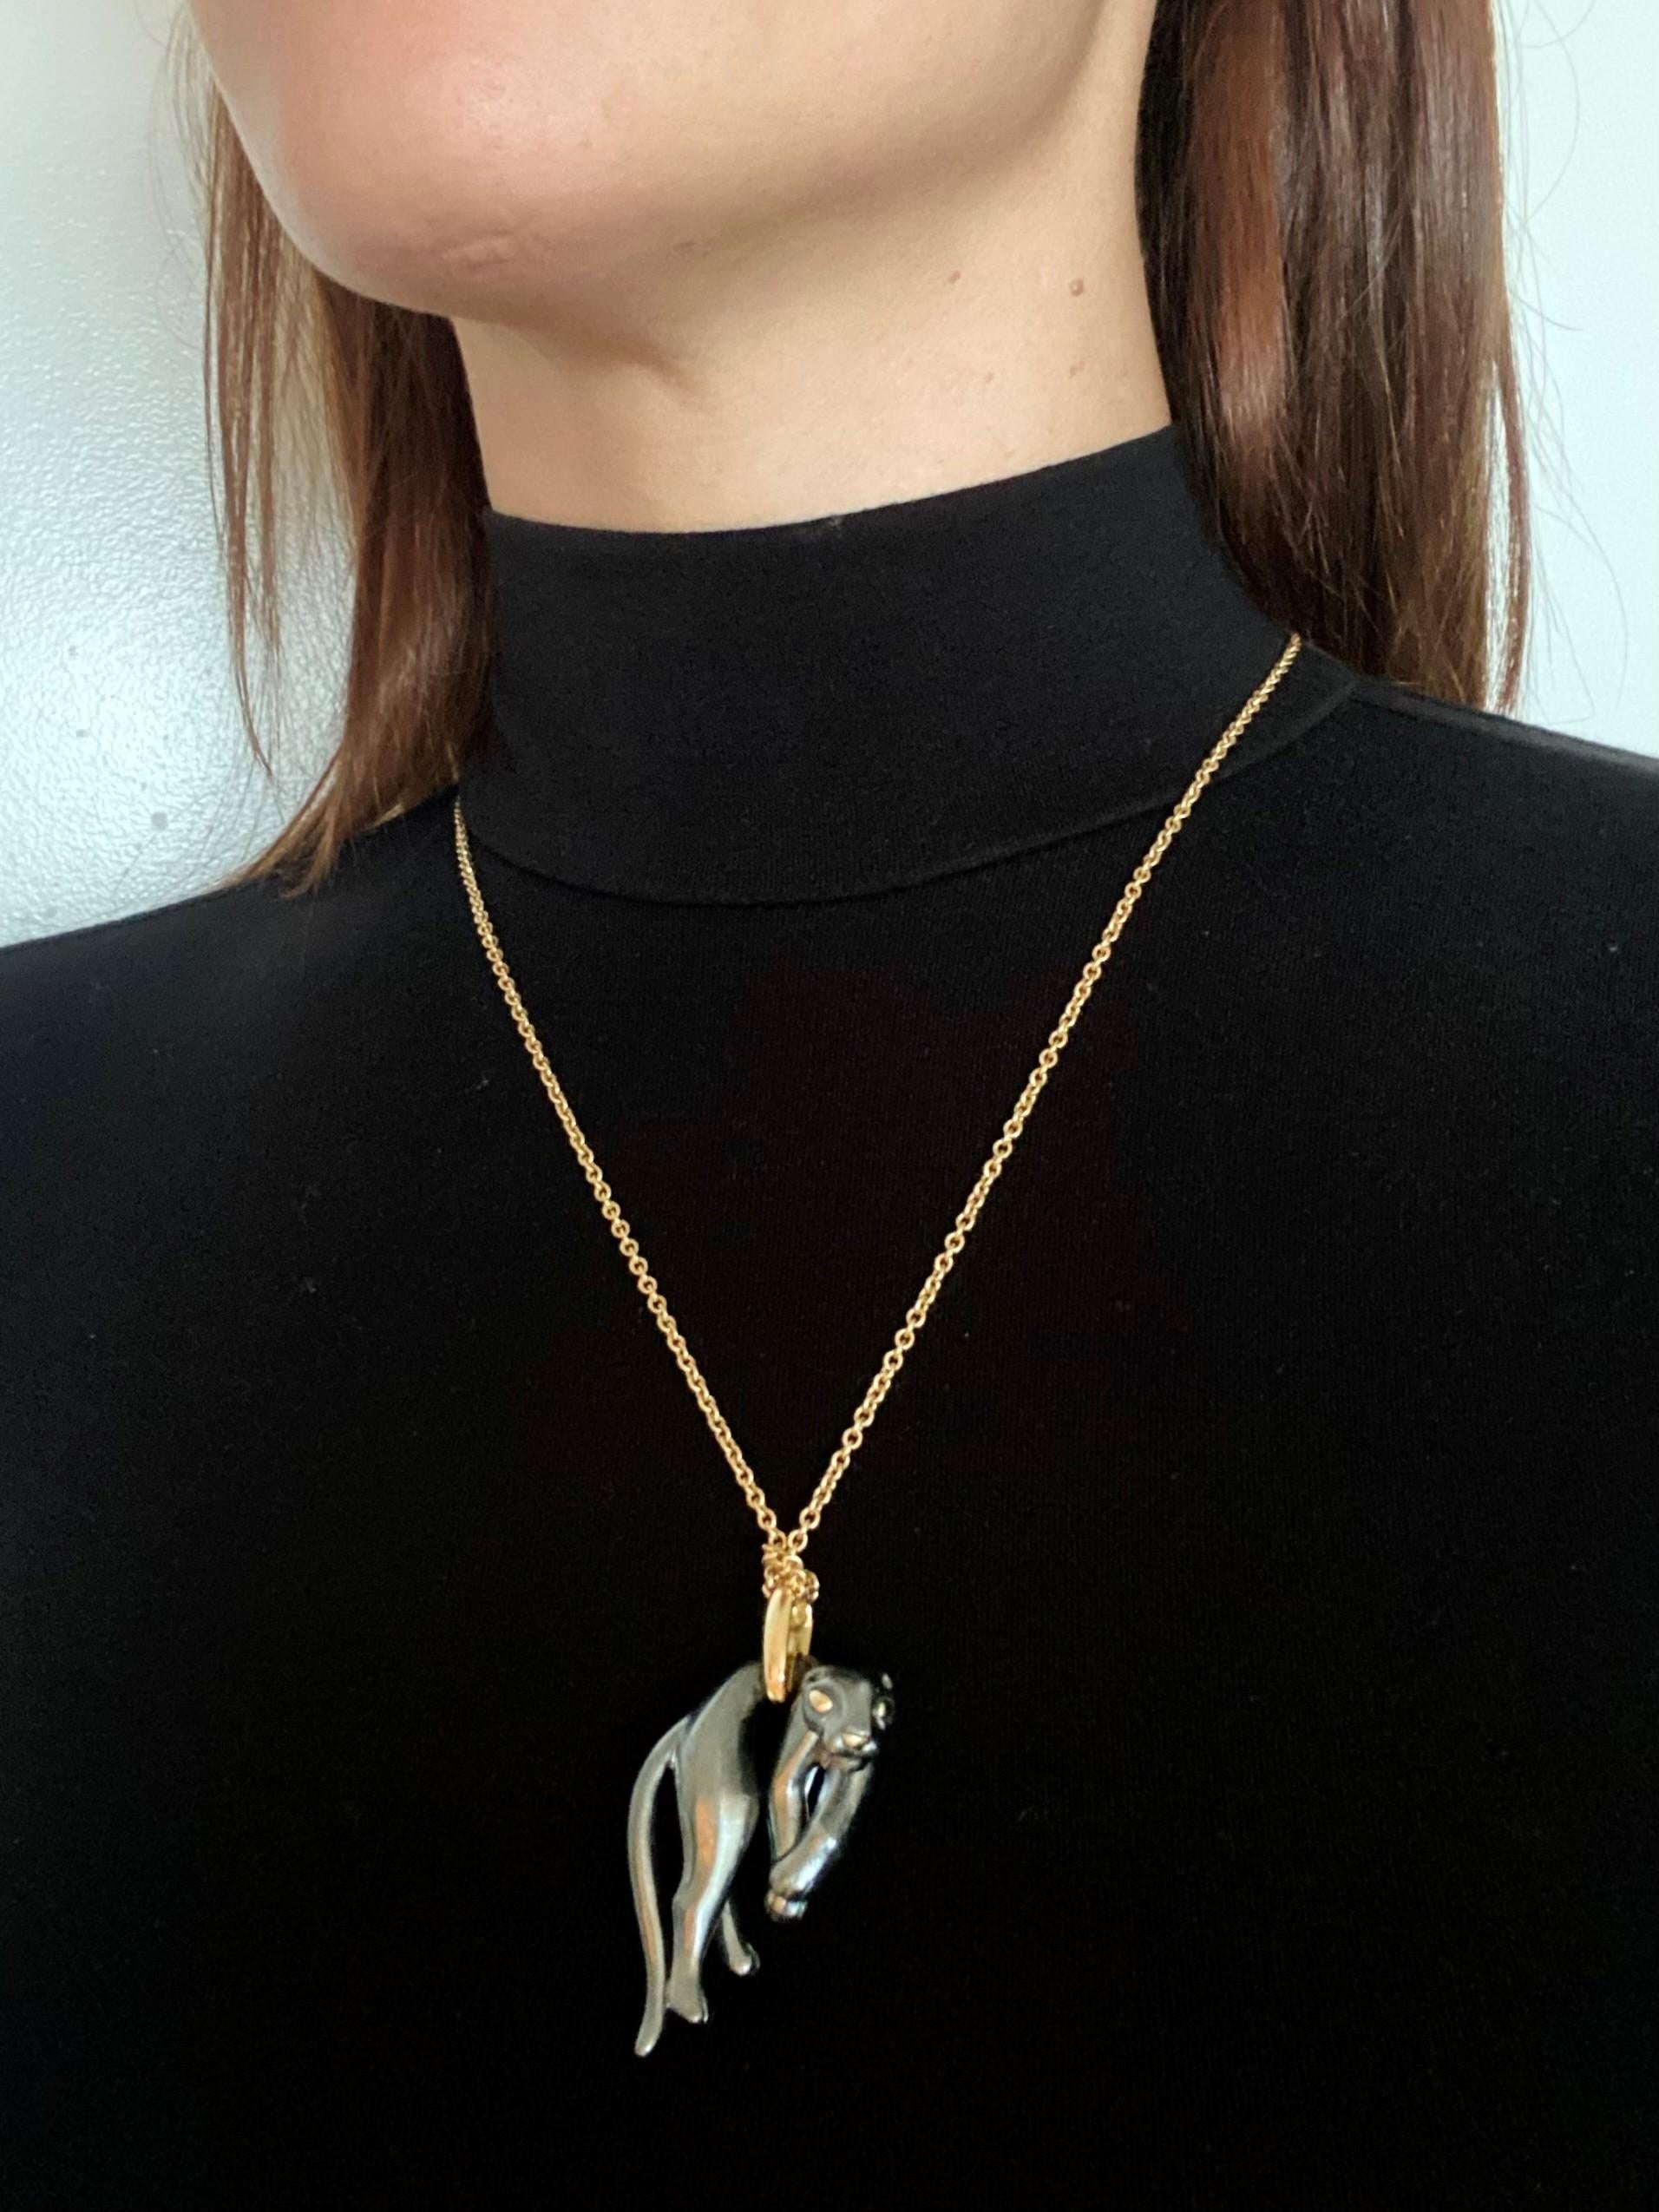 Panthere necklace chain designed by Cartier.

An iconic piece, created in Paris France by the jewelry house of Cartier, back in the 1970-1980. The design feature the stylized Panther Animal, hanging from the body to the right with the eyes and the